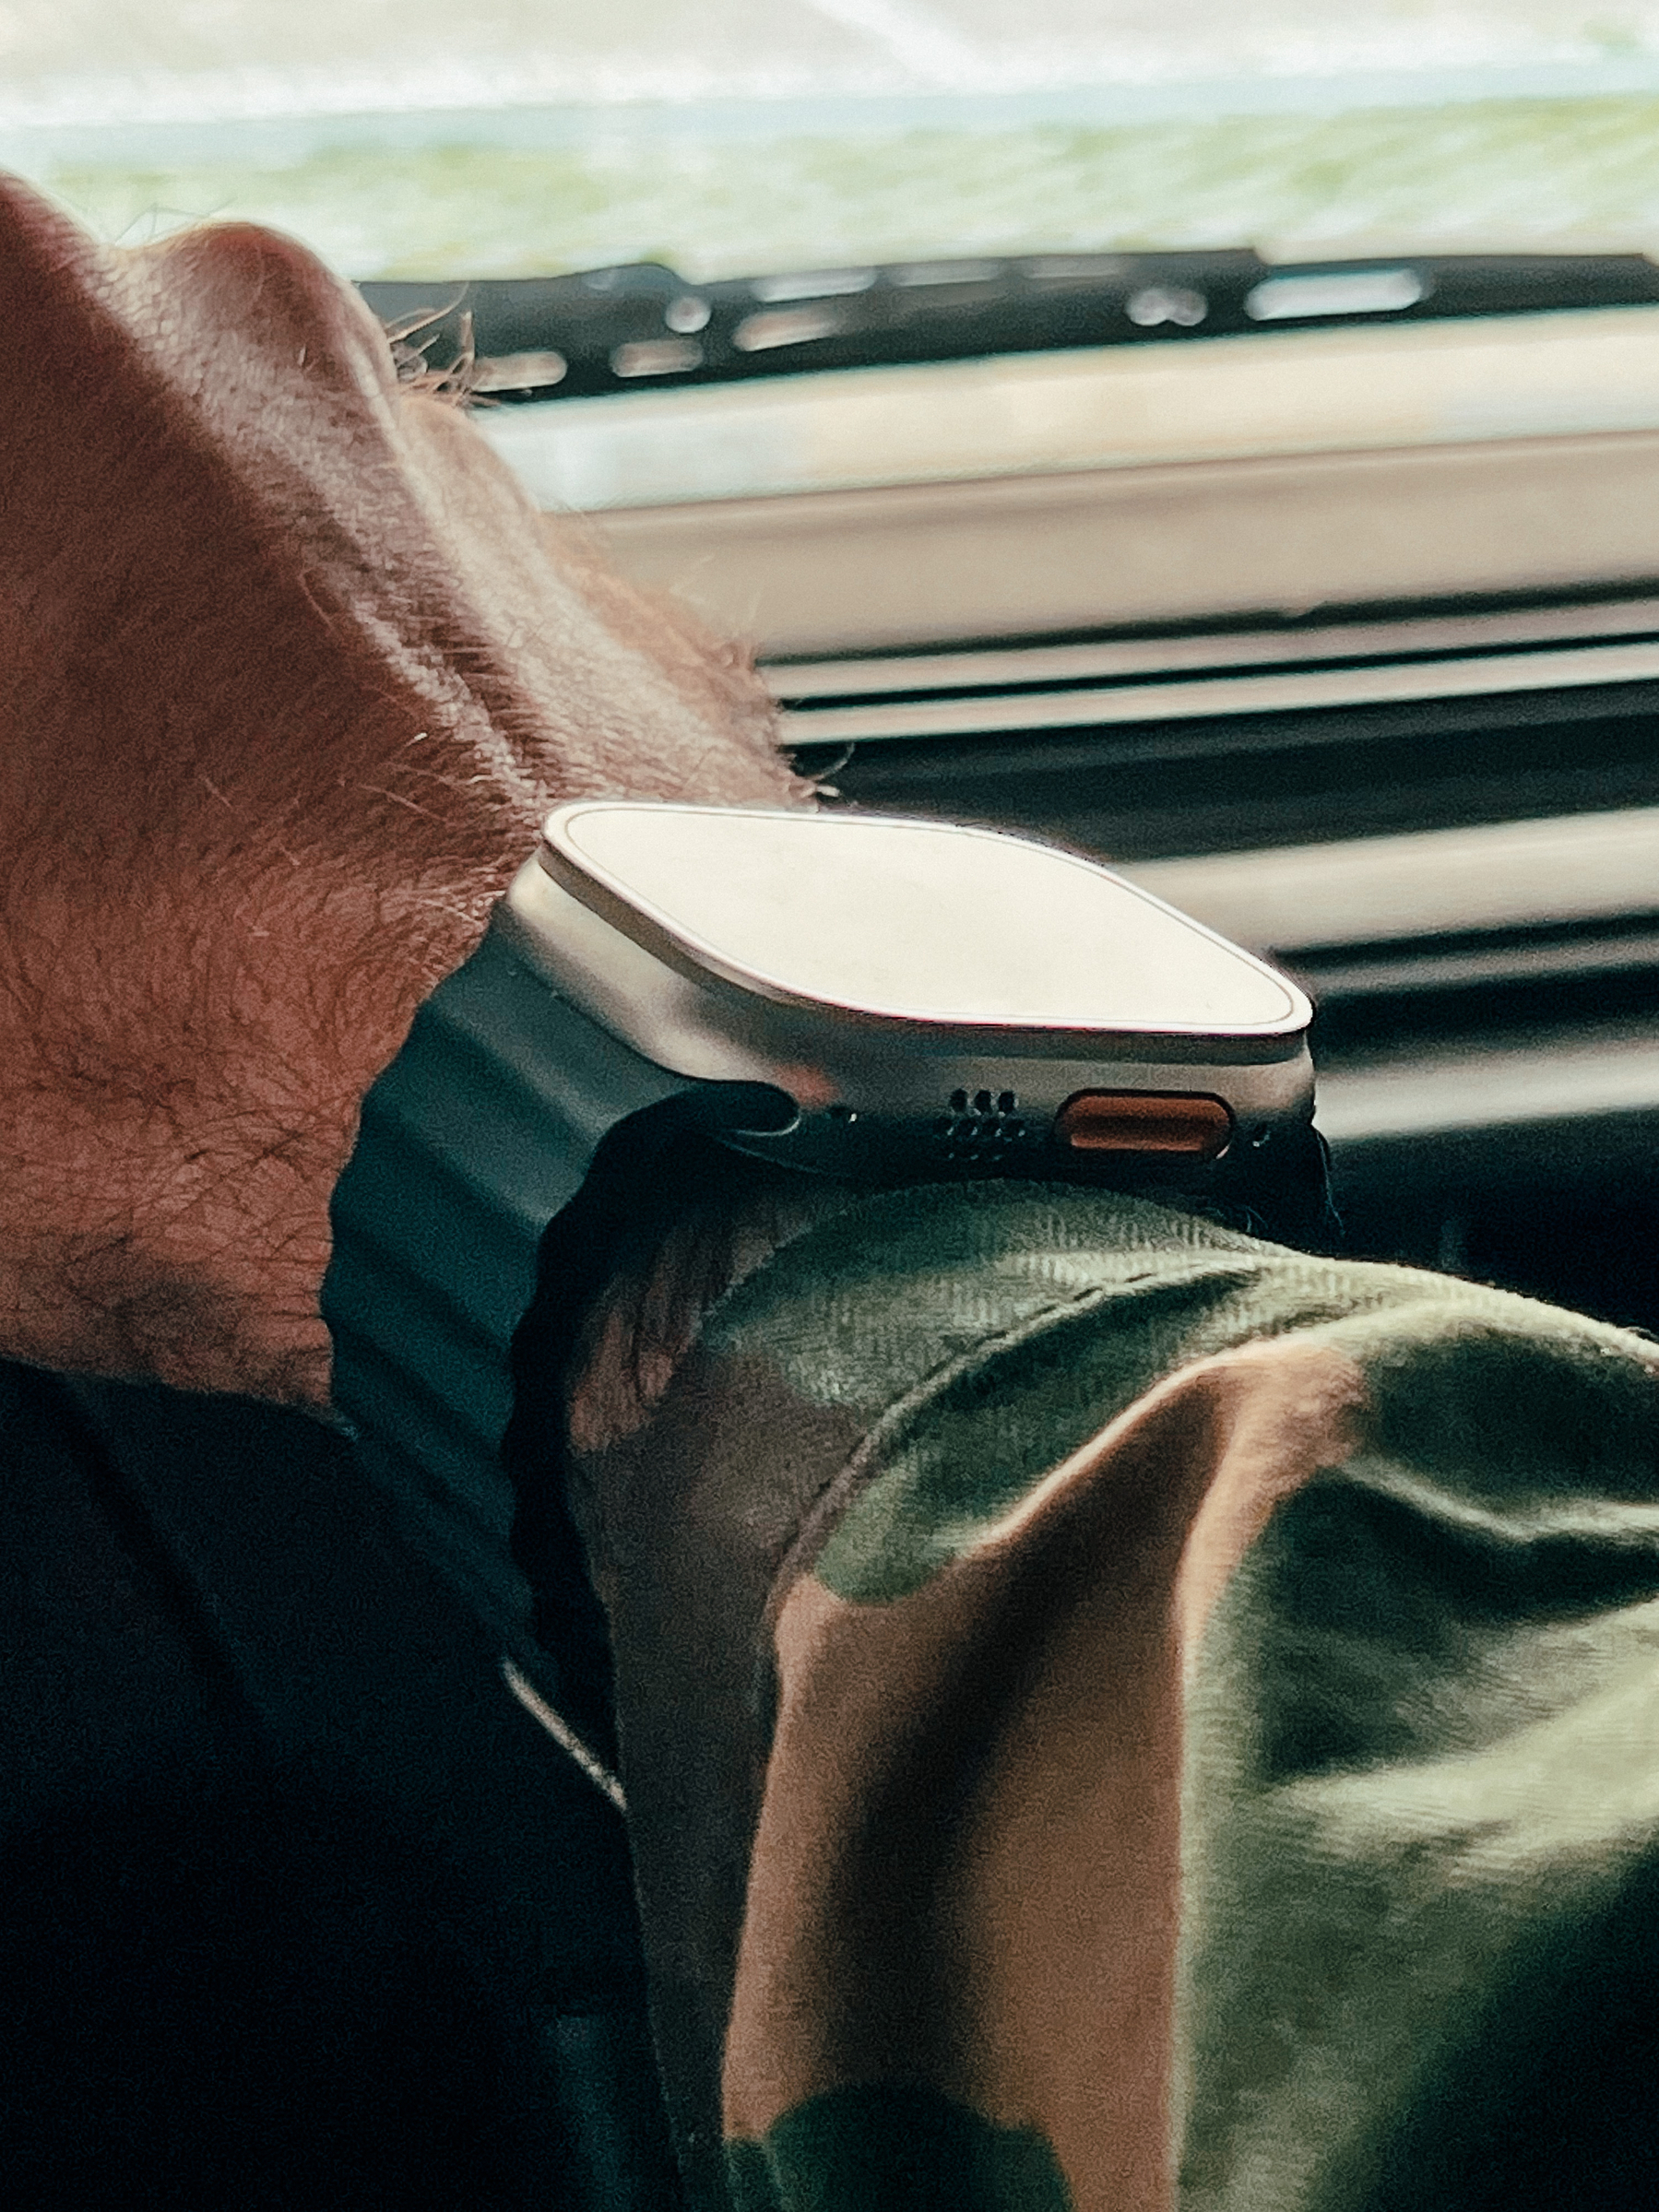 An Apple Watch Ultra on a wrist, we can see a camouflaged jacket covering the arm